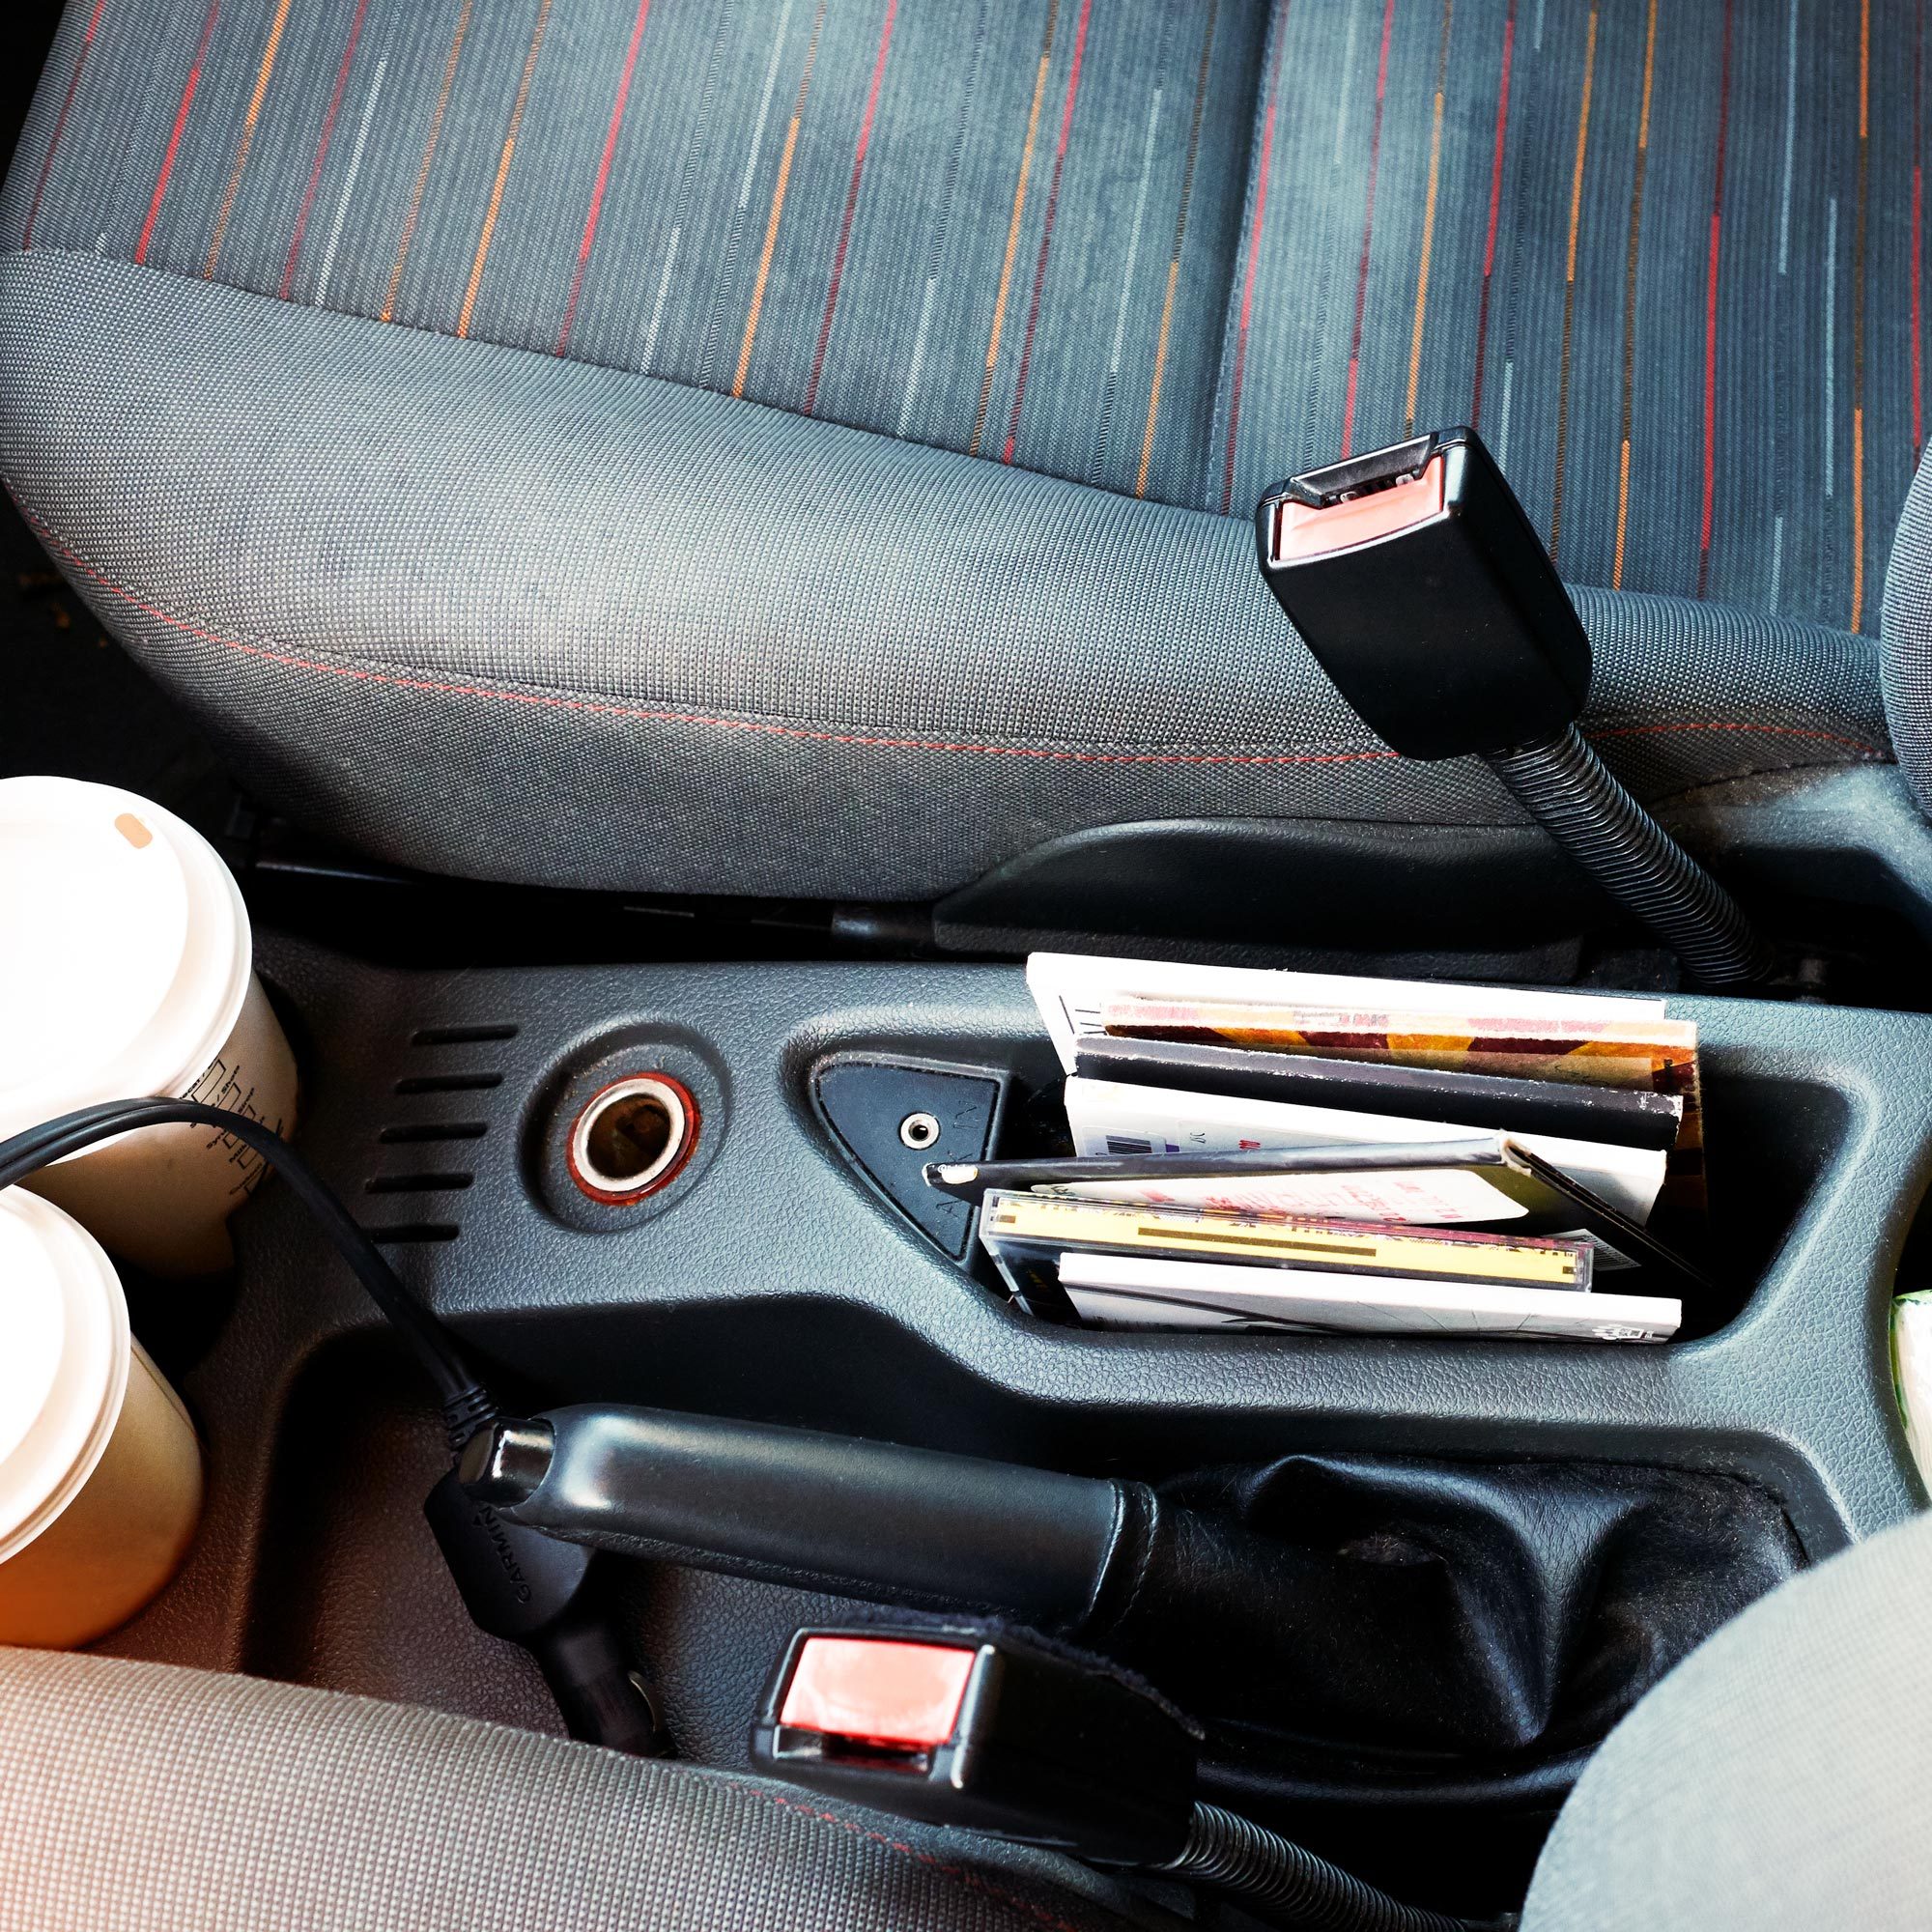 Cleaning Tips To Have Your Car's Interior Looking Like New